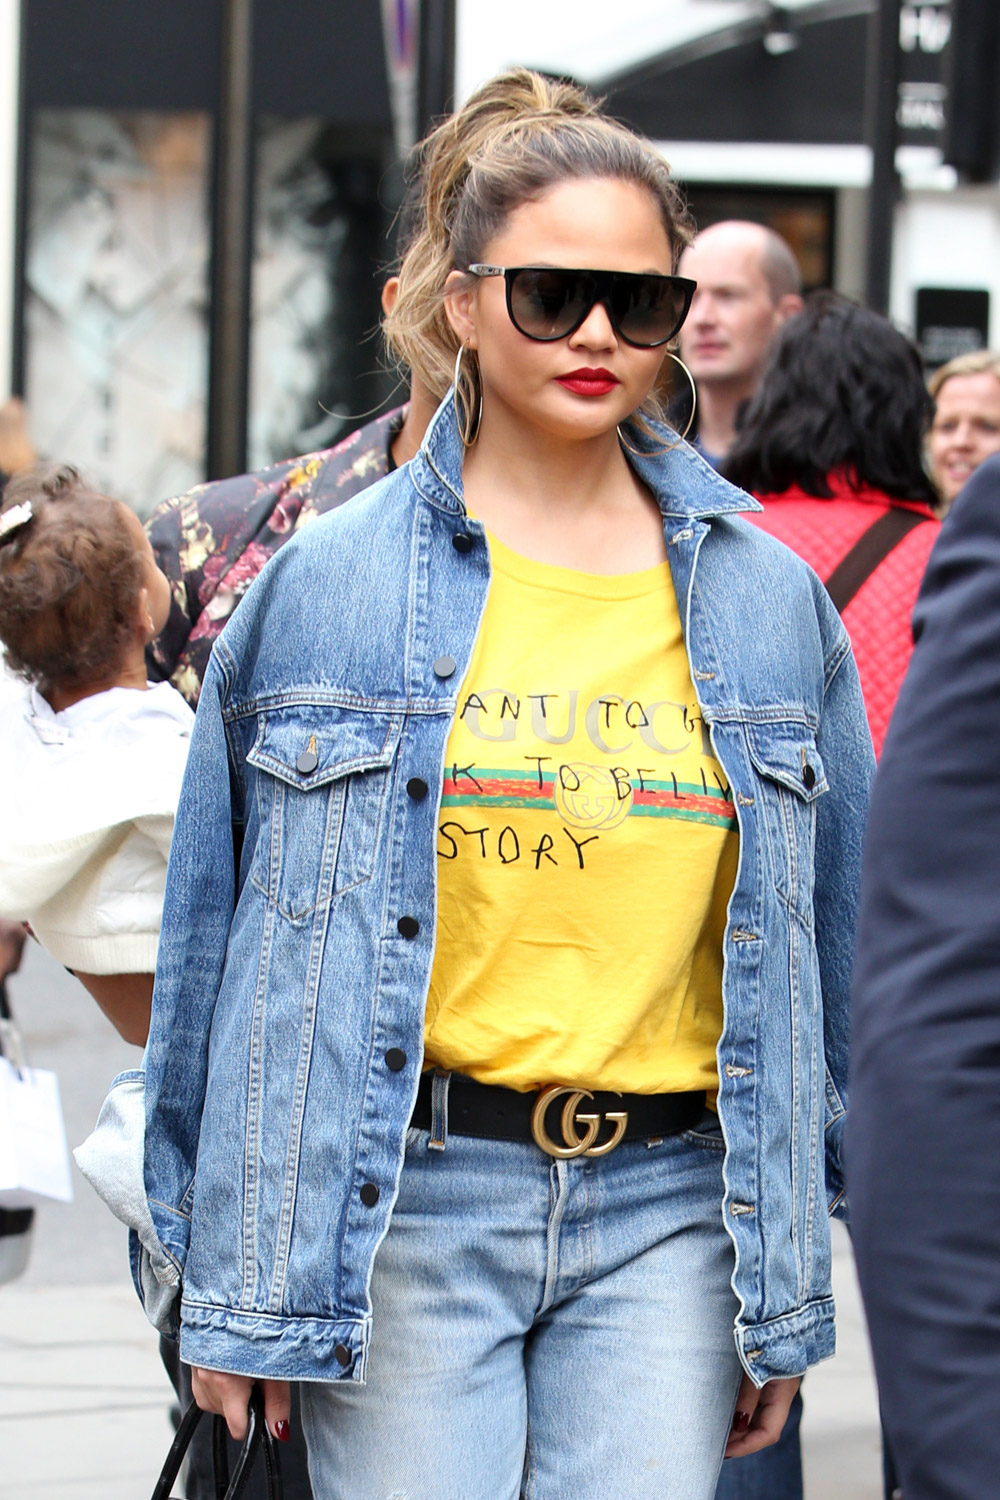 Jean Jacket Outfits: The Jean Jacket Outfits Celebrities Swear By